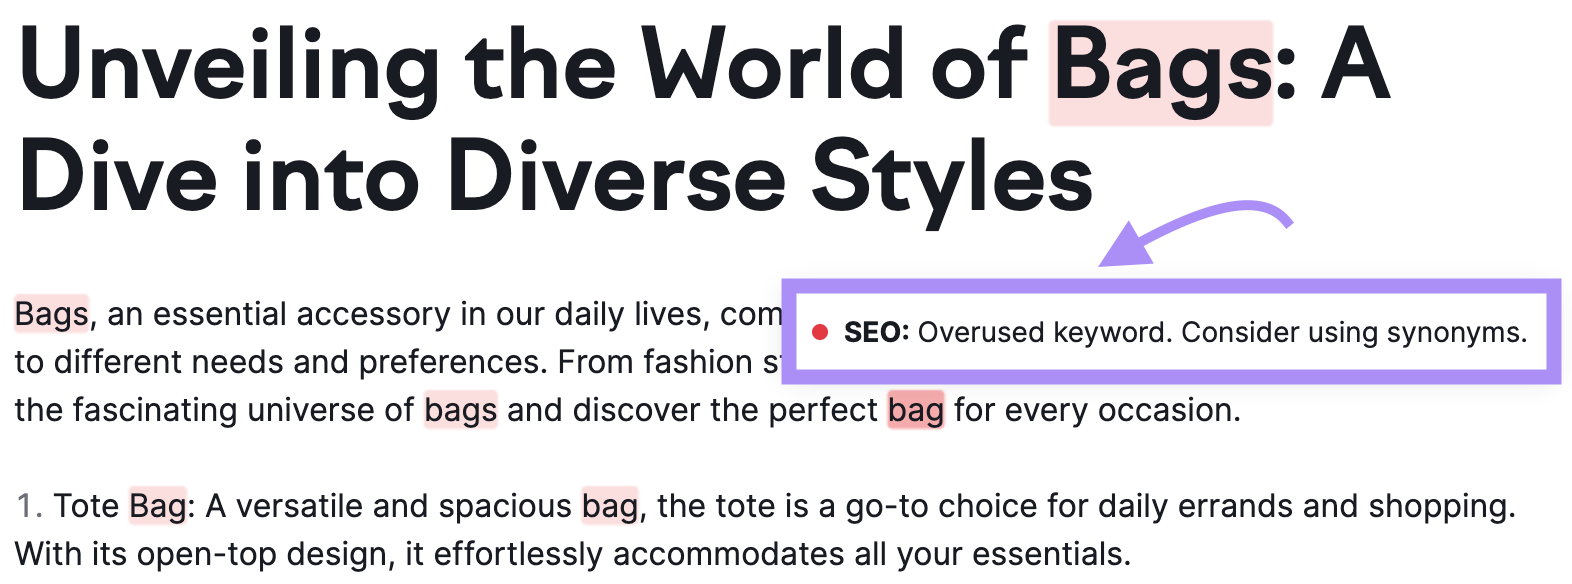 "bag" highlighted as an overused keyword in the content